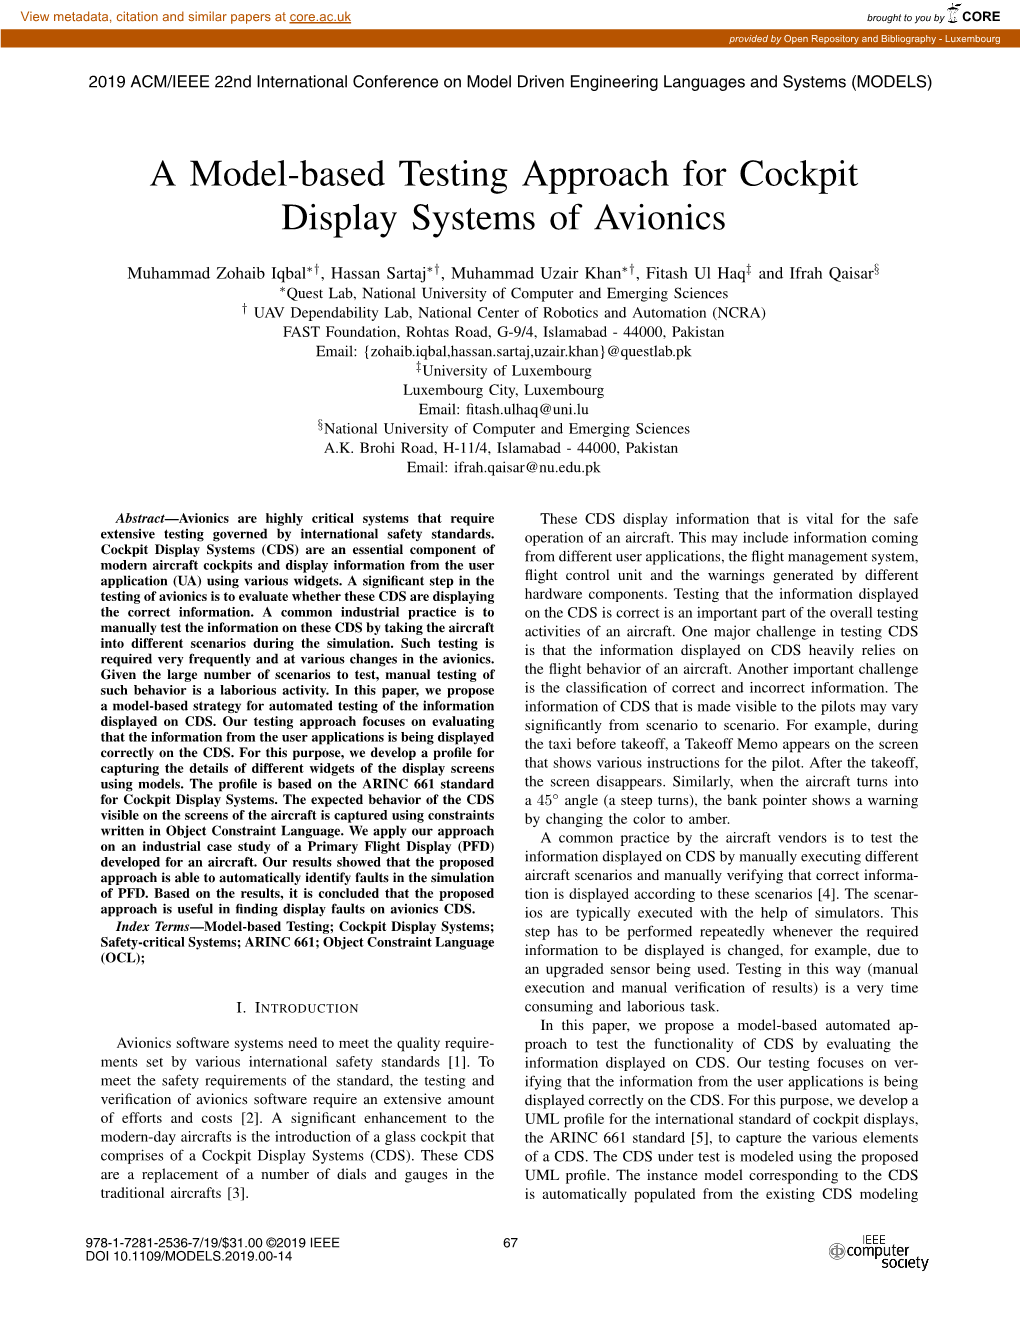 A Model-Based Testing Approach for Cockpit Display Systems of Avionics